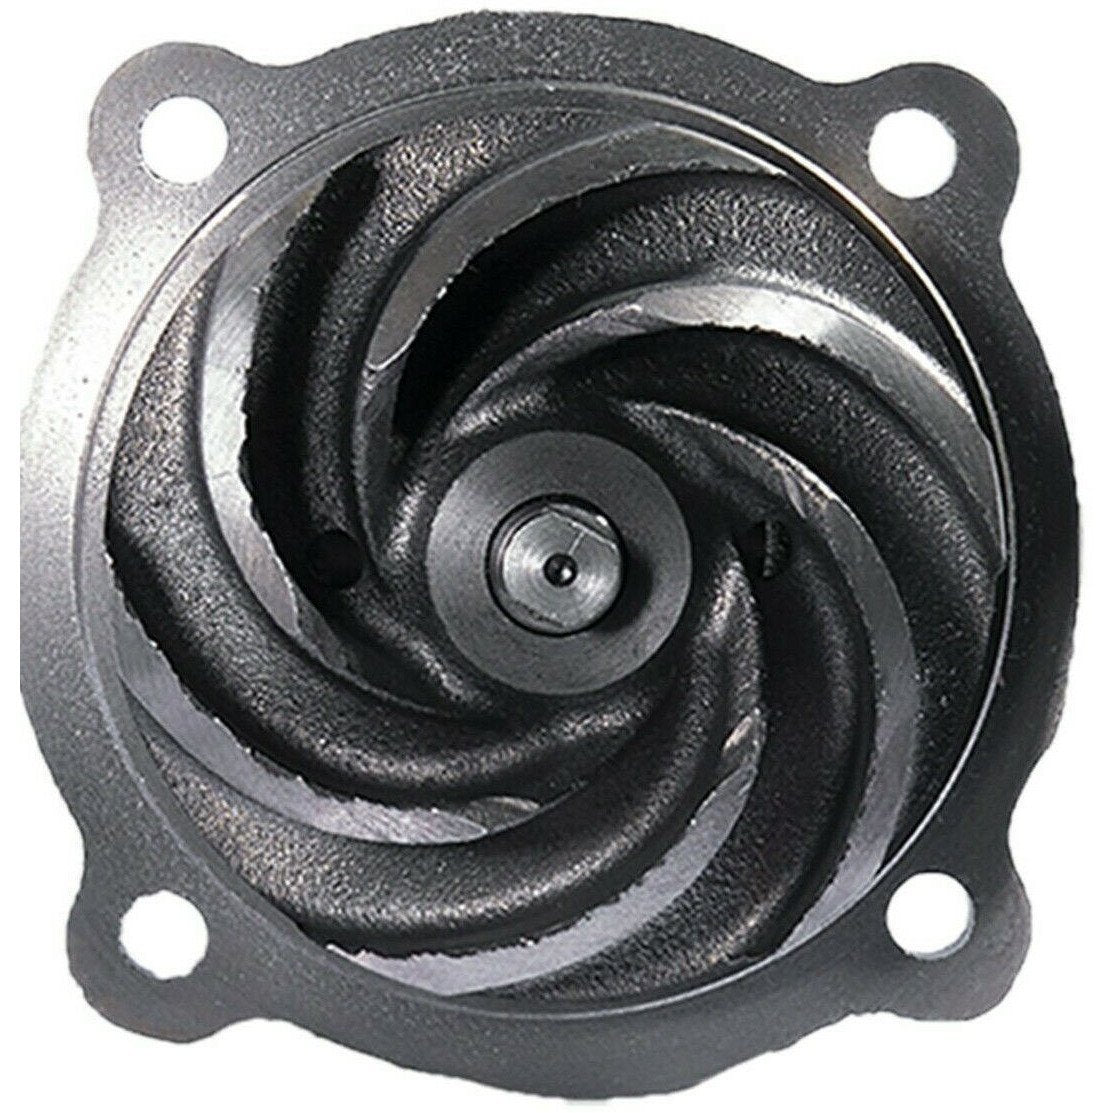 Water Pump Replacement For CAT - Caterpillar 2W1223 1W5644 8N5796 1W2929 1W6446+